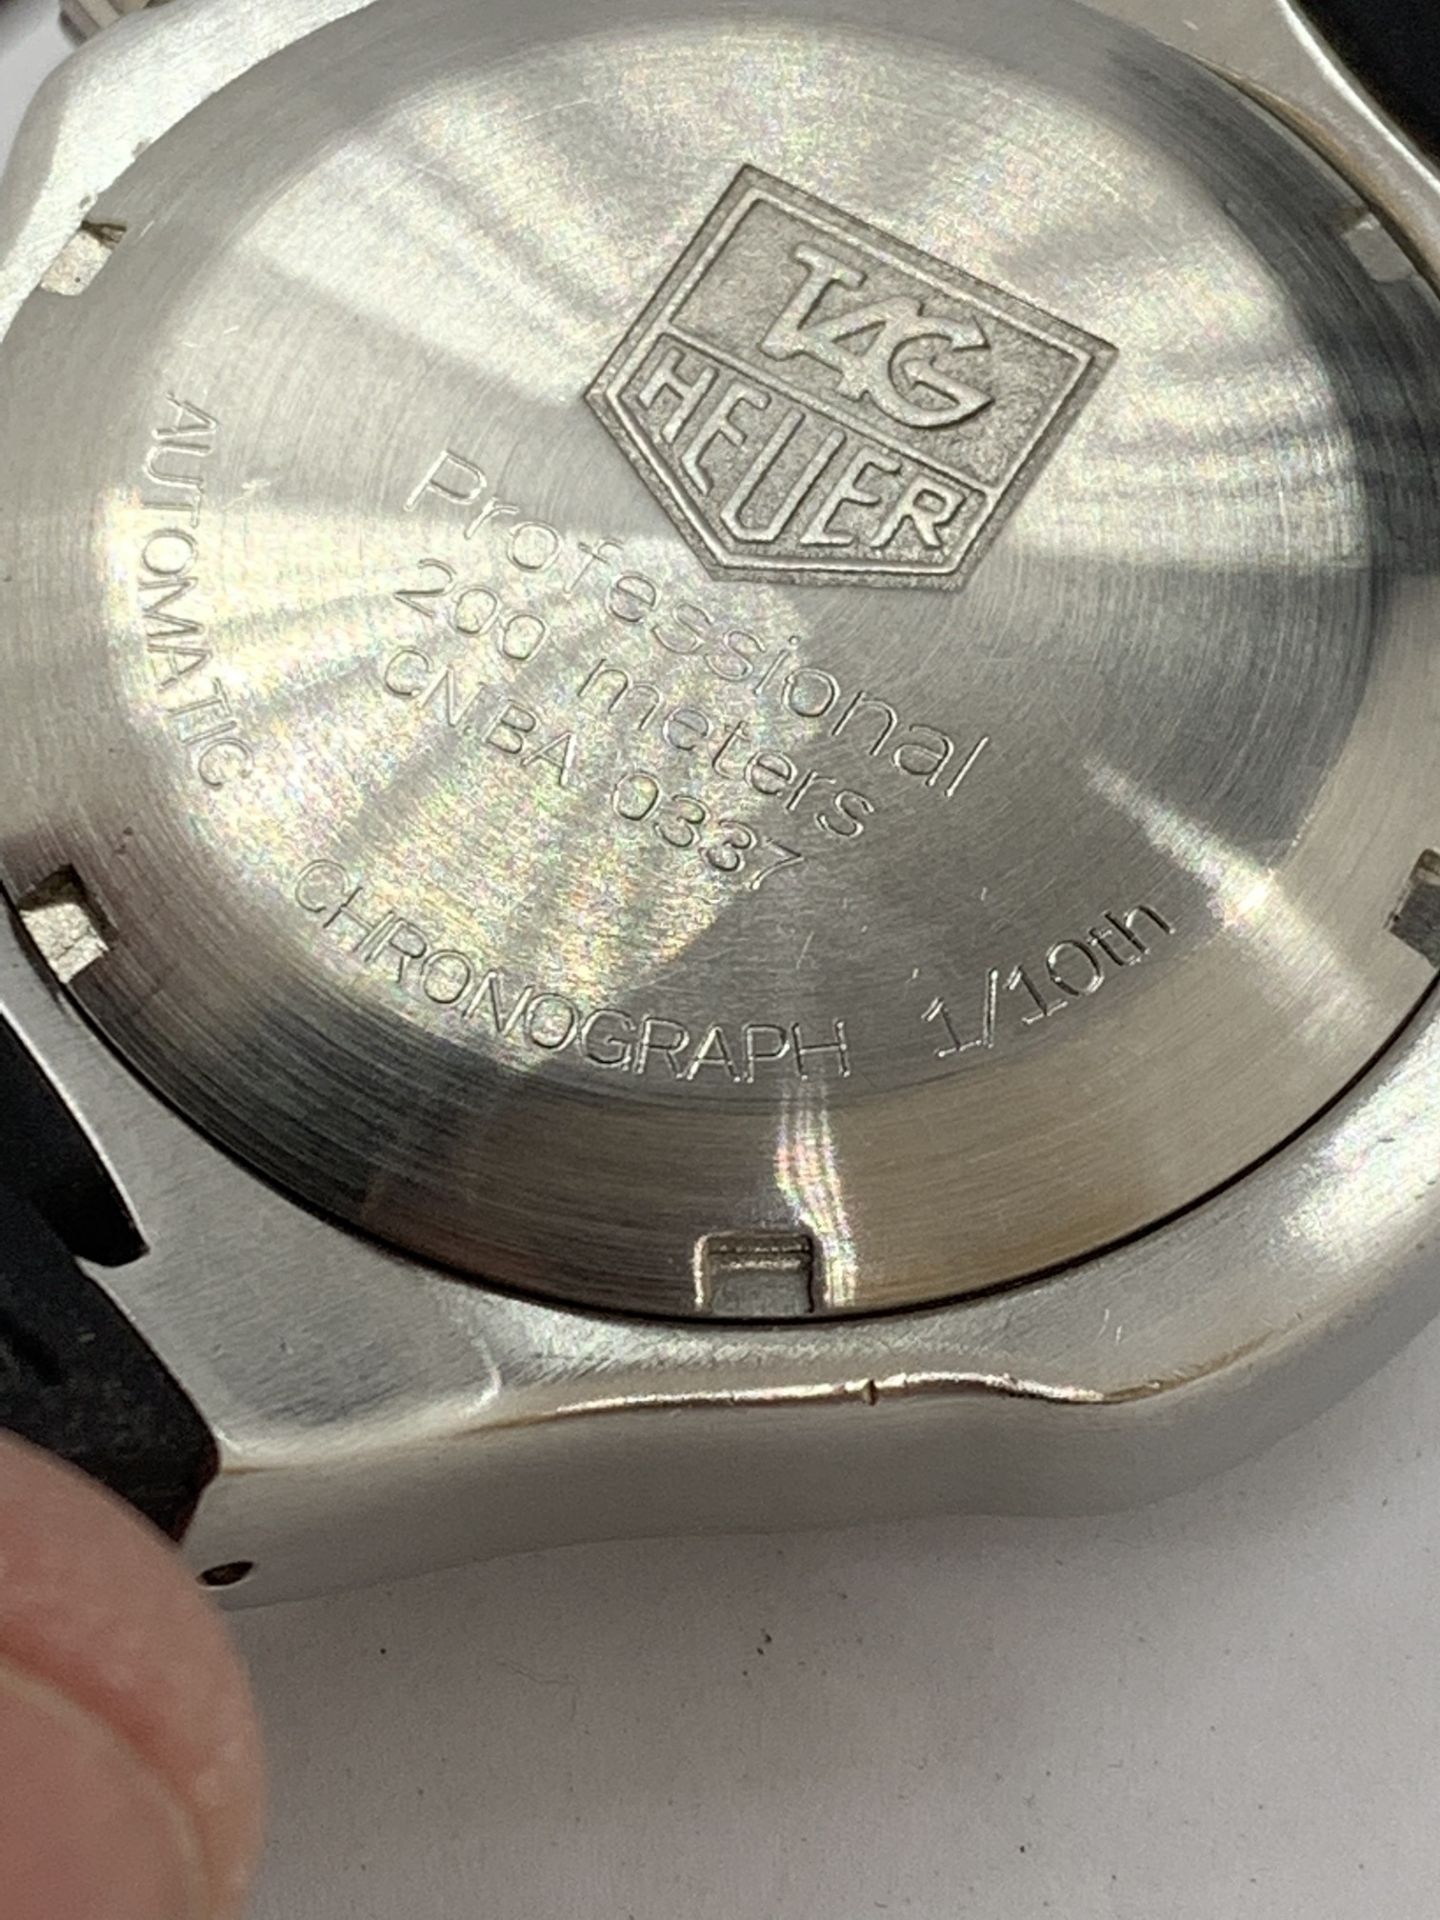 TAG HEUER PROFESSIONAL CHRONO AUTOMATIC WATCH - 200 METERS - Image 8 of 11